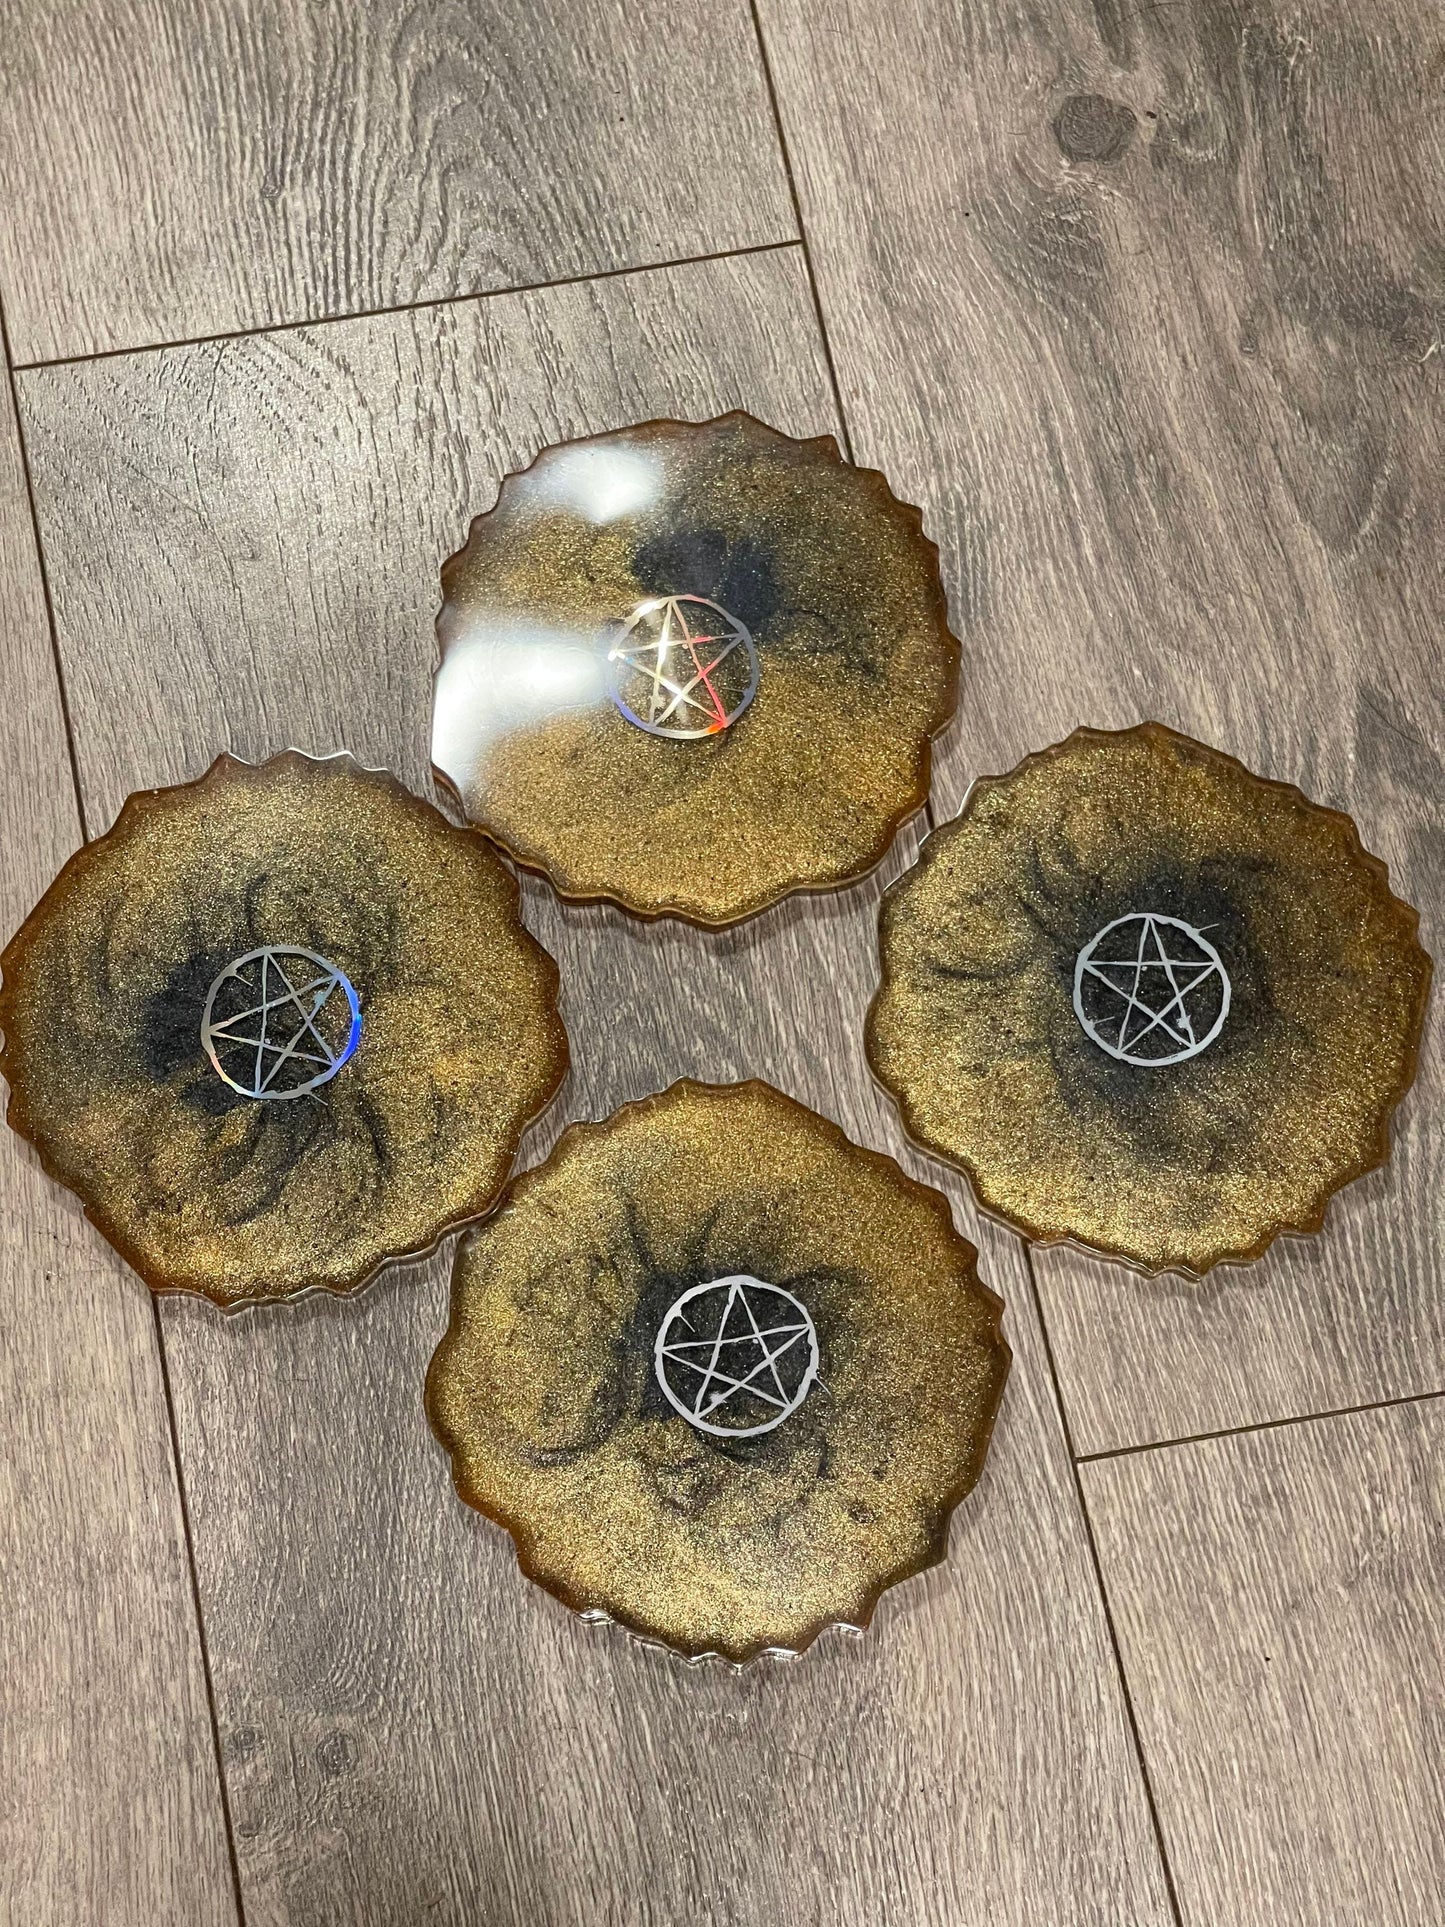 Handmade Orange and Black Coasters Set with Holographic Pentagrams - Candle Plates - Home Decor